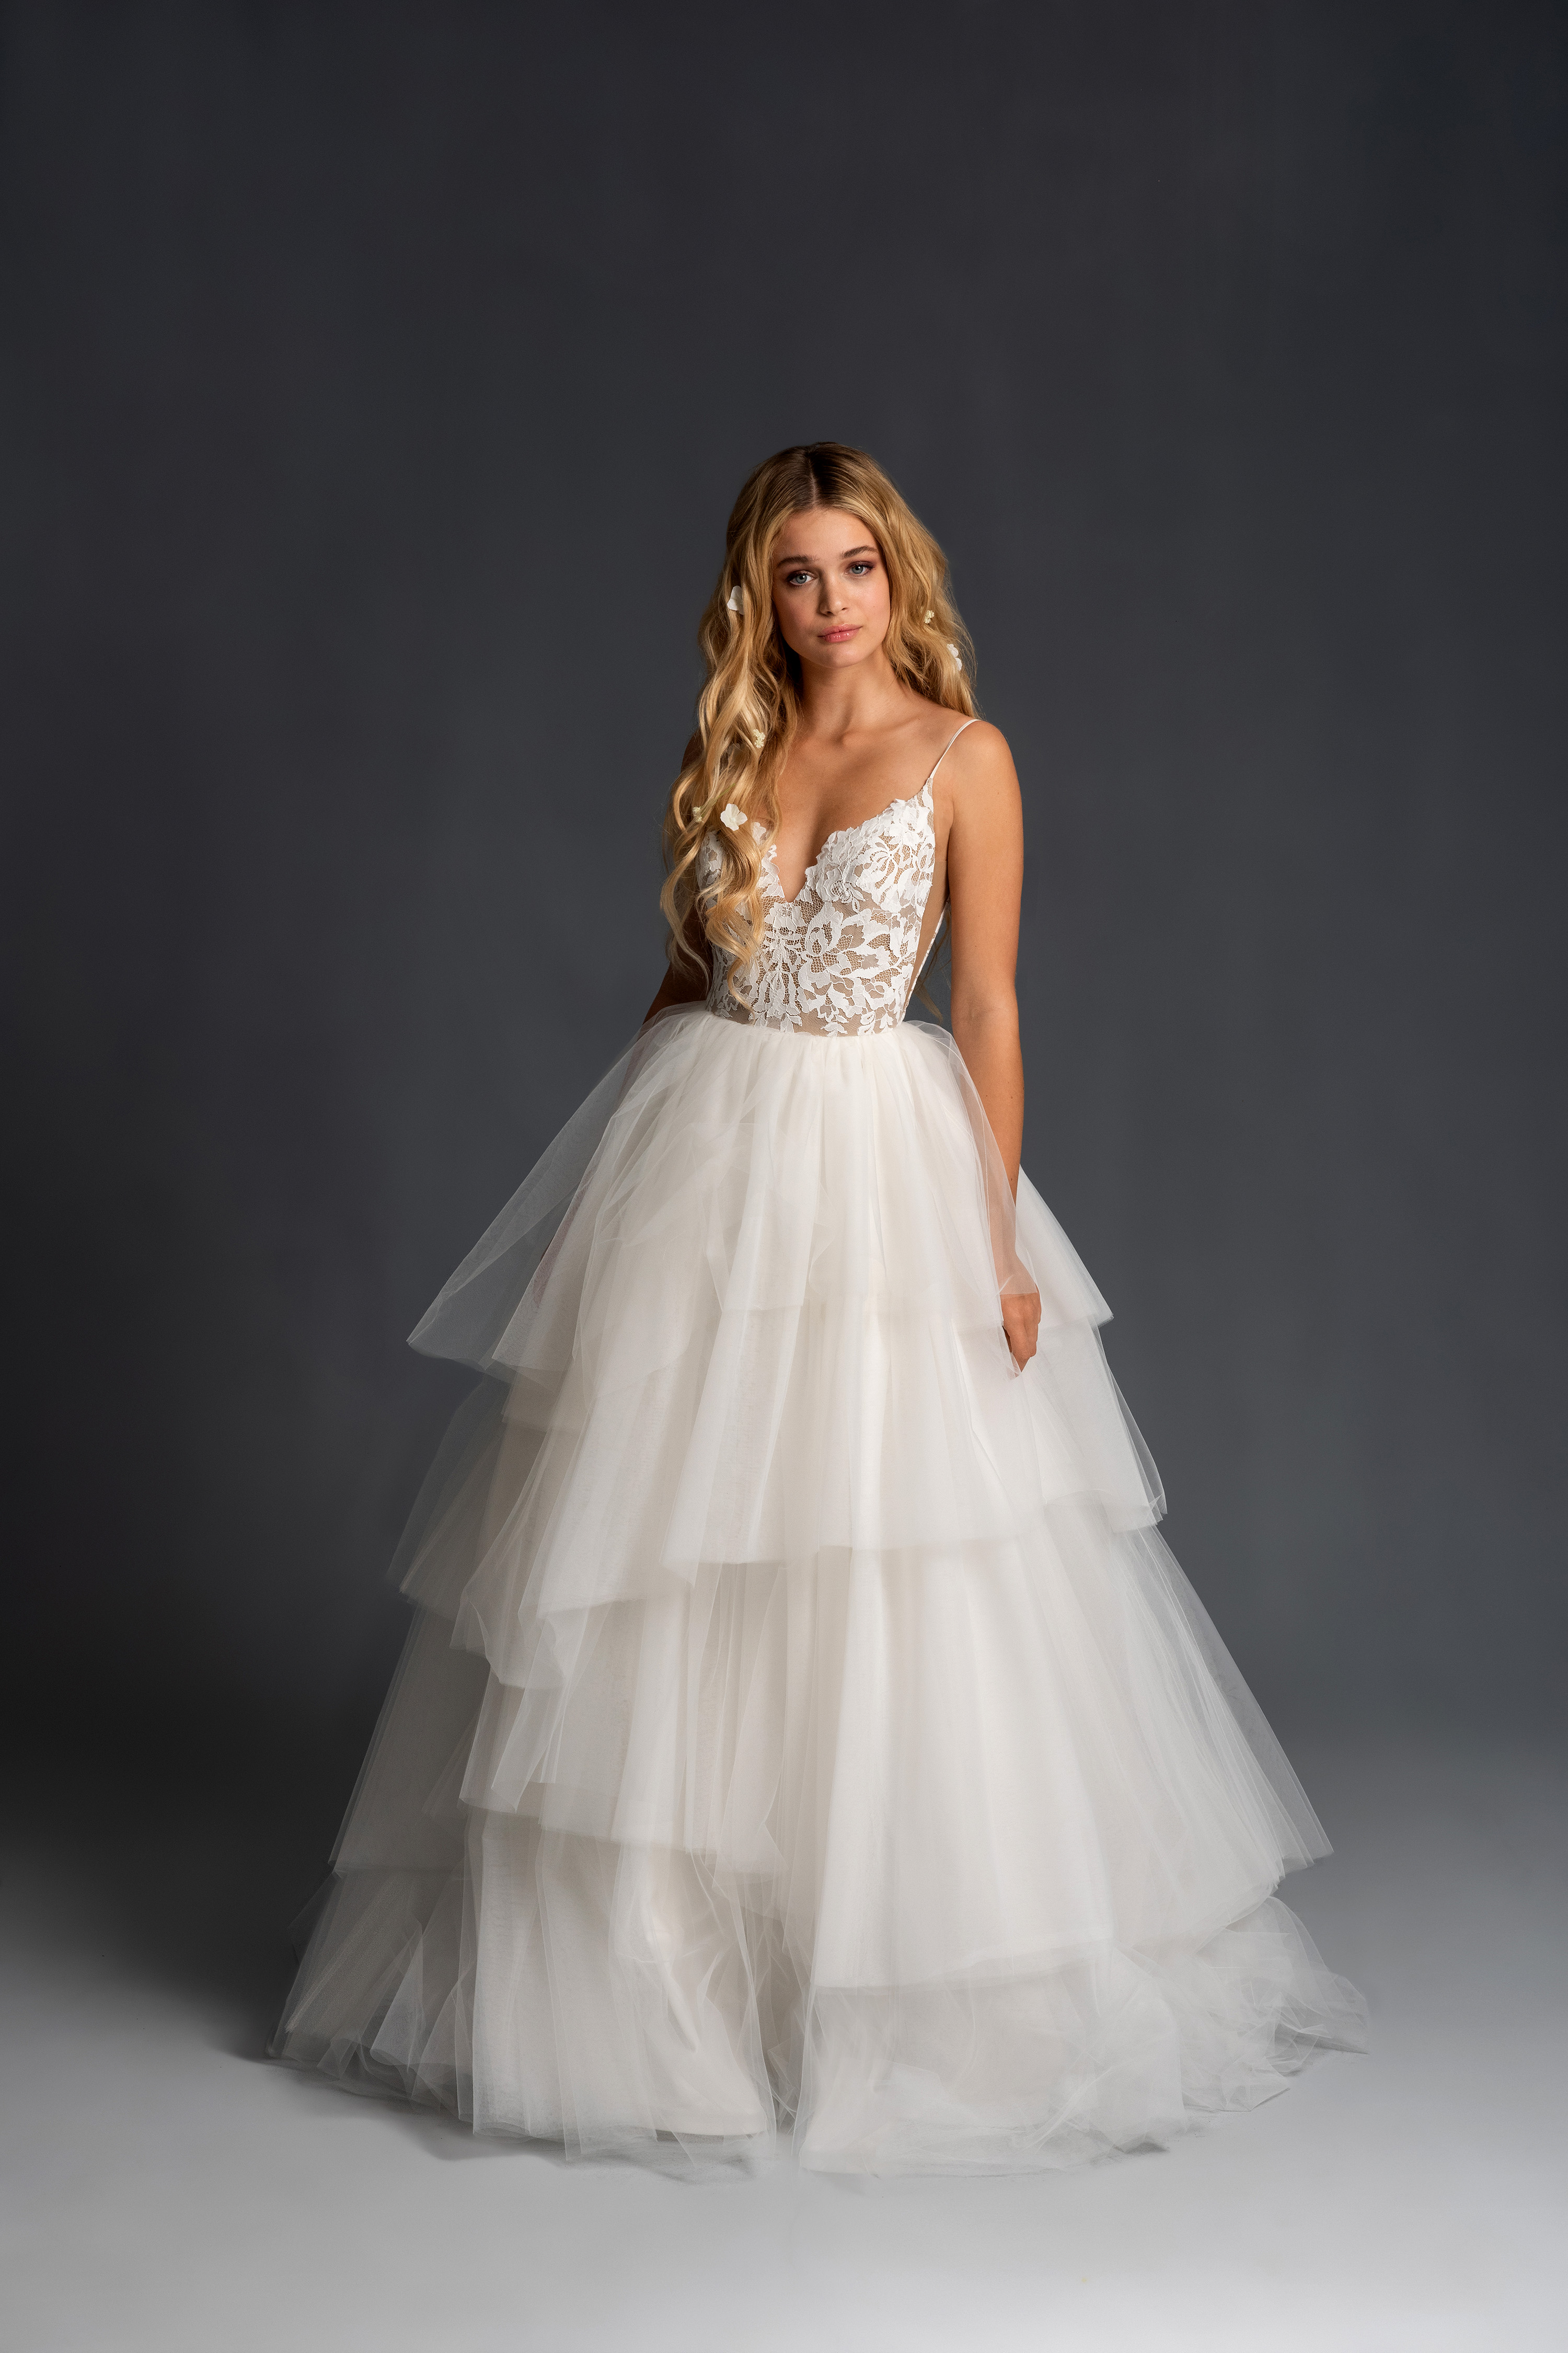 Hayley Paige Blush Wedding Dresses Best 10 - Find the Perfect Venue for ...